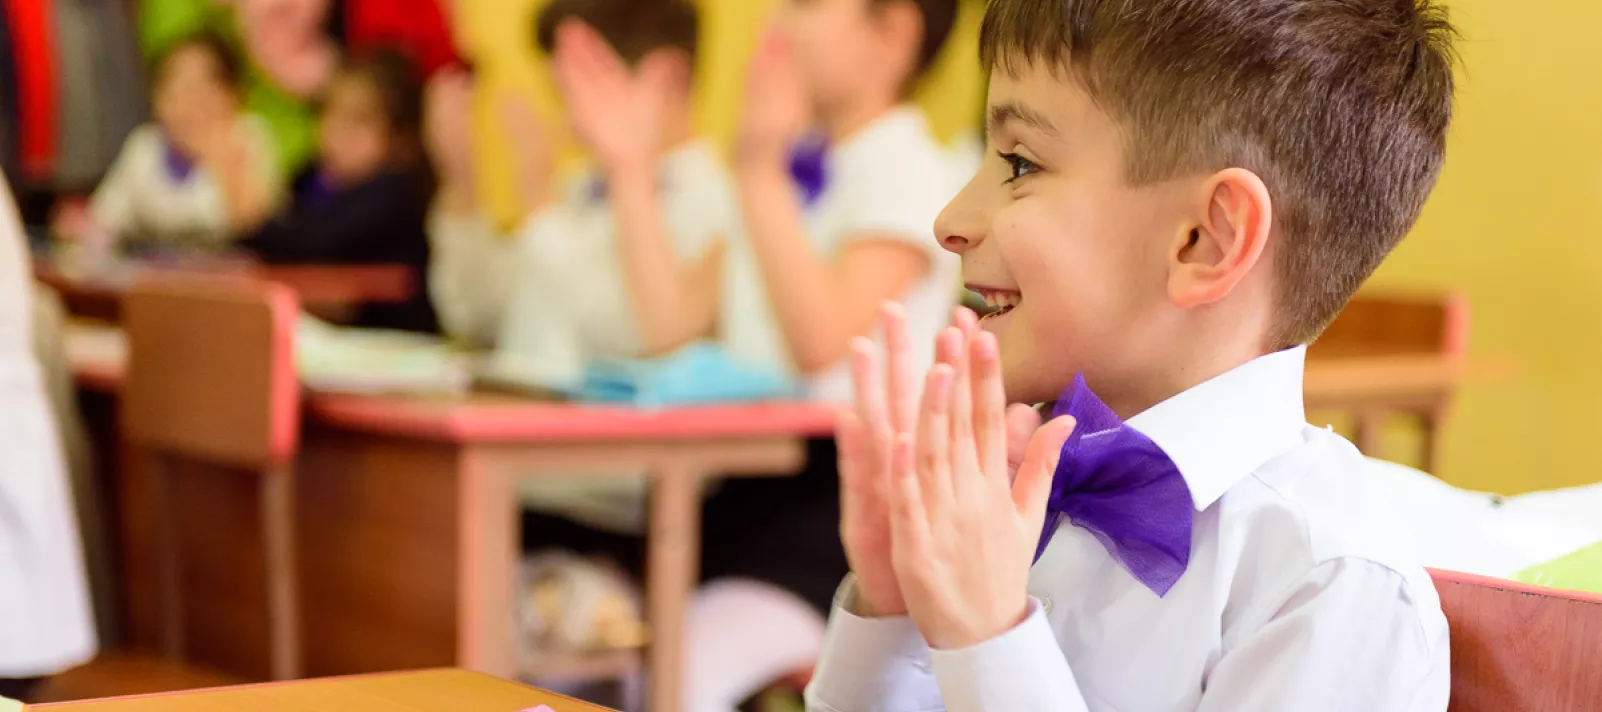 A boy with a purple bow over his white shirt claps his hands and smiles in the classroom during the lesson.